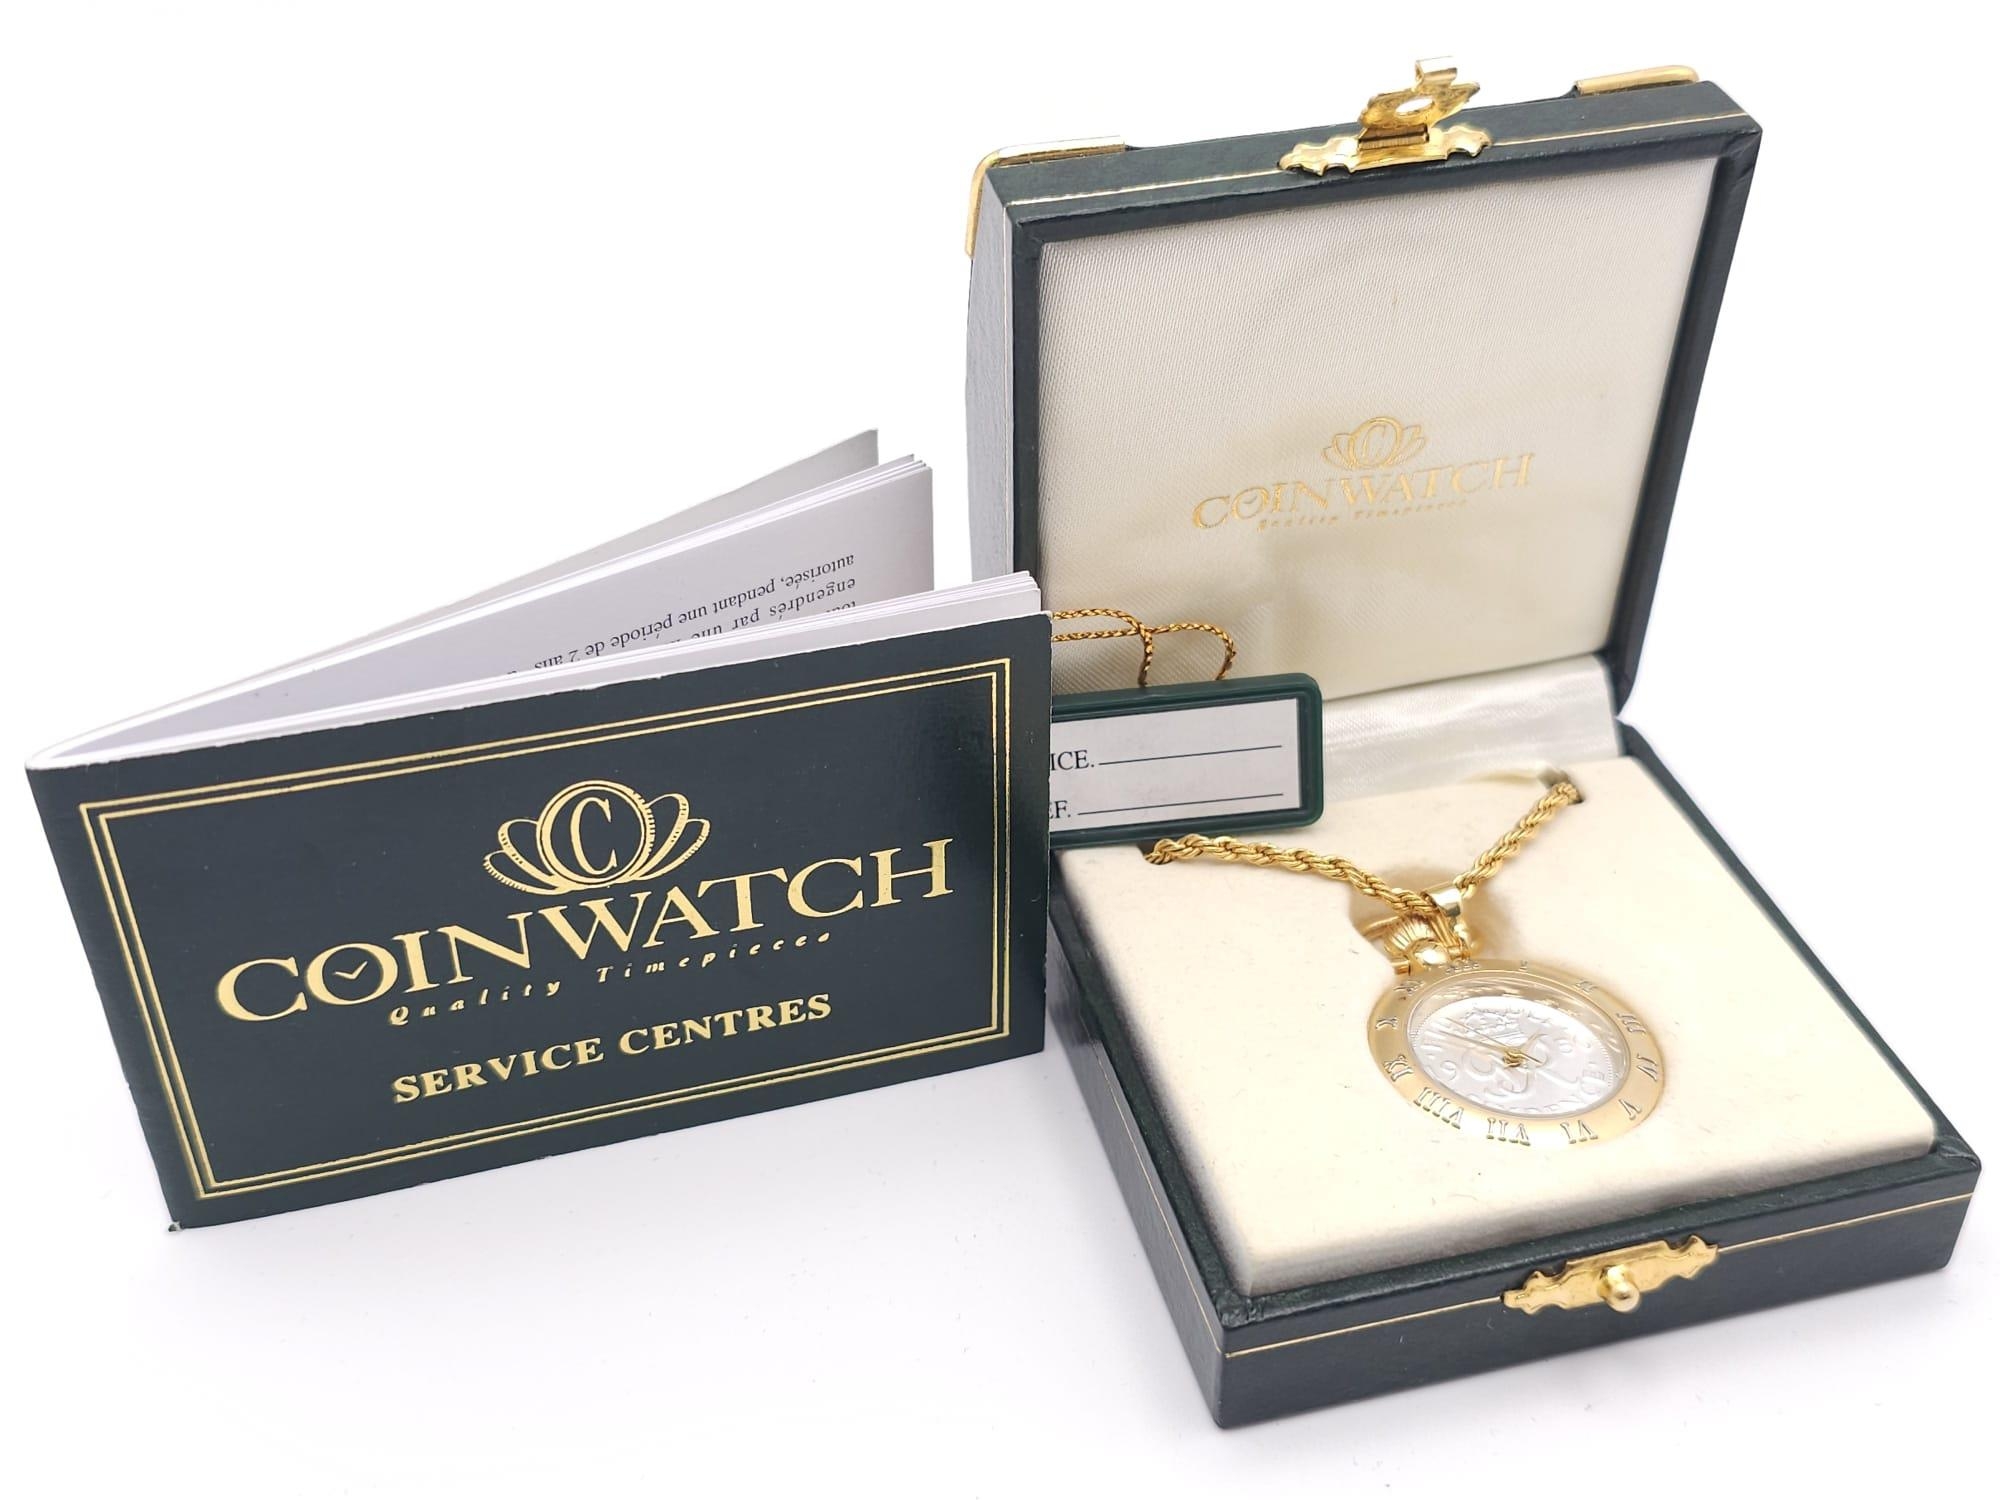 A BRAND NEW "COINWATCH" WITH 2 YEAR GUARANTEE . A PENDANT WATCH WITH A GENUINE COIN AS THE DIAL , - Bild 2 aus 18